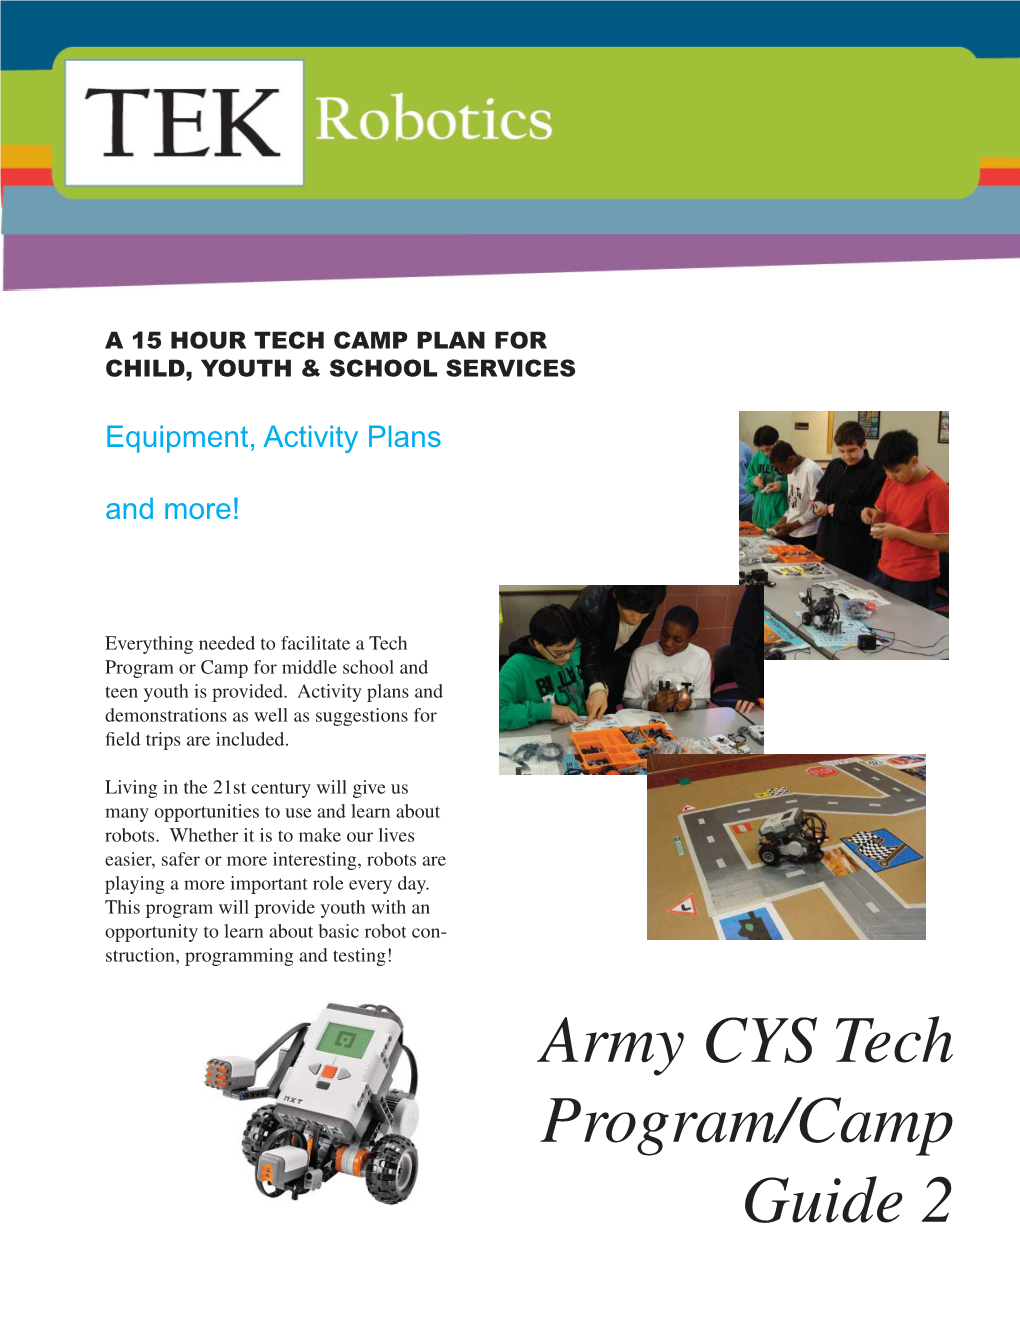 Army CYS Tech Program/Camp Guide 2 Acknowledgements